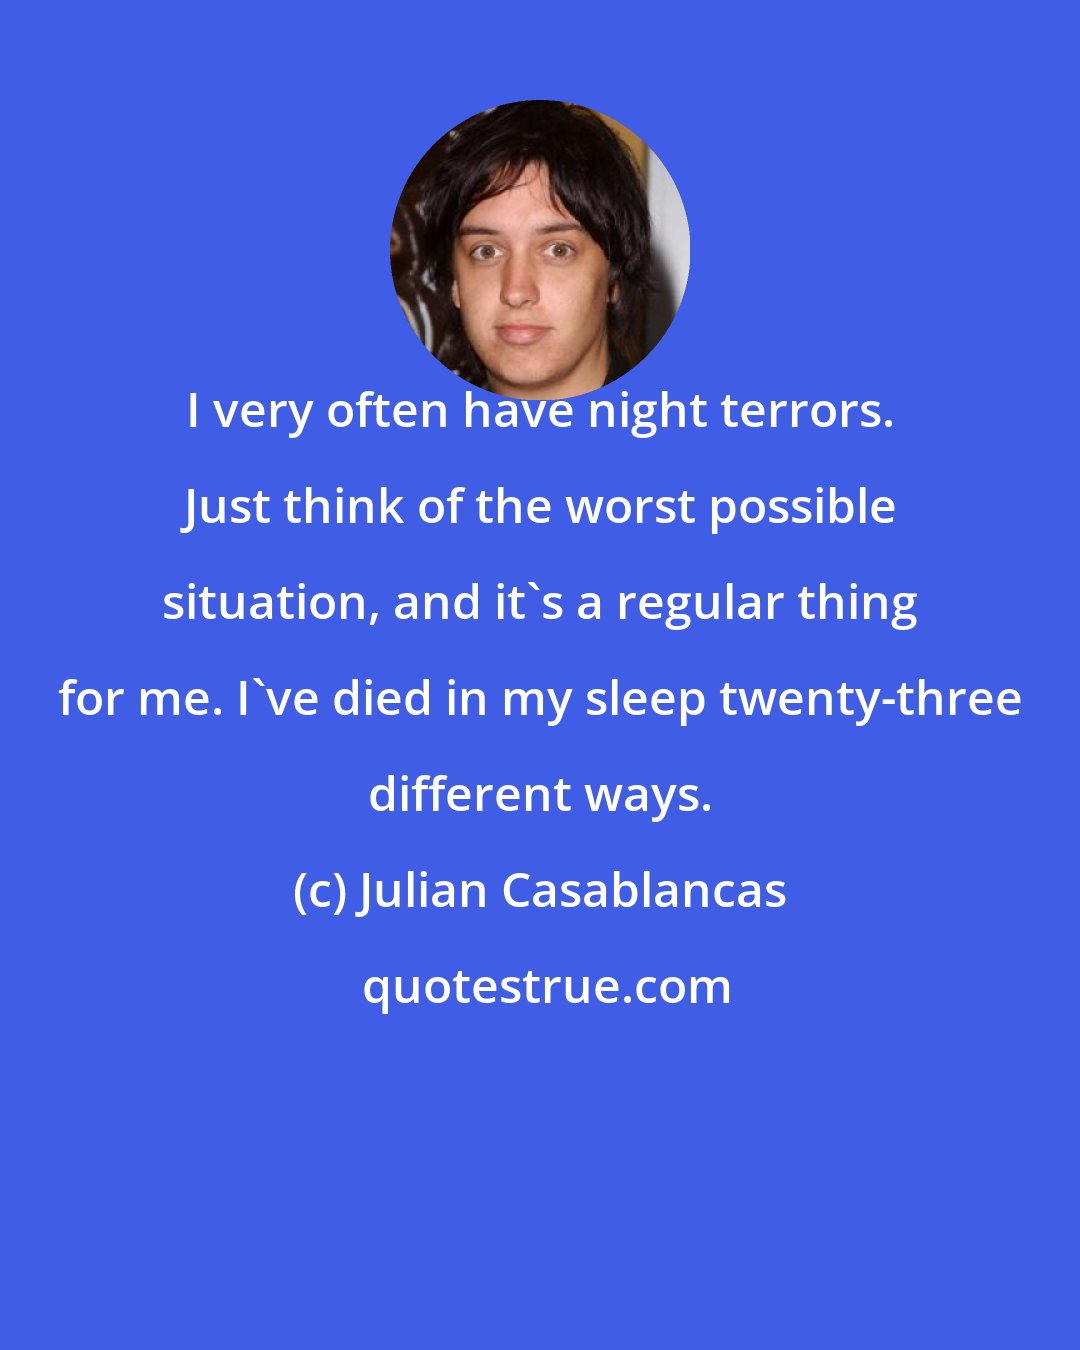 Julian Casablancas: I very often have night terrors. Just think of the worst possible situation, and it's a regular thing for me. I've died in my sleep twenty-three different ways.